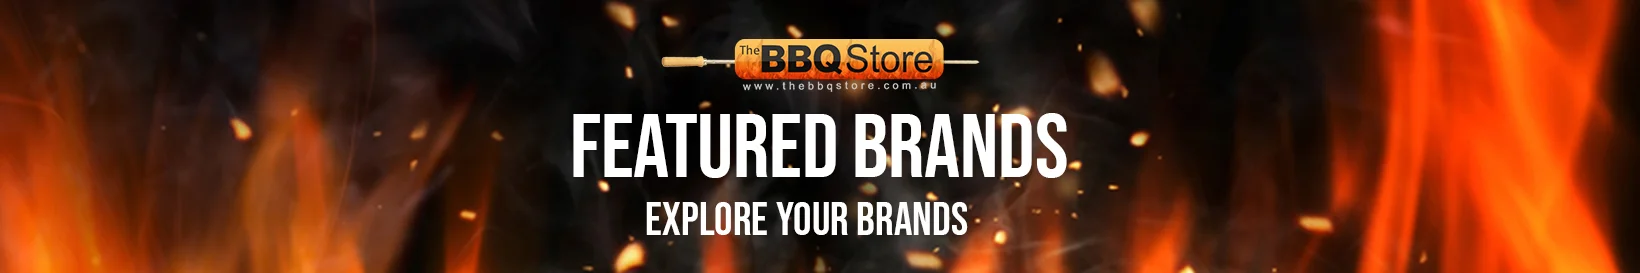 best place to buy australian barbecues from top rated brands